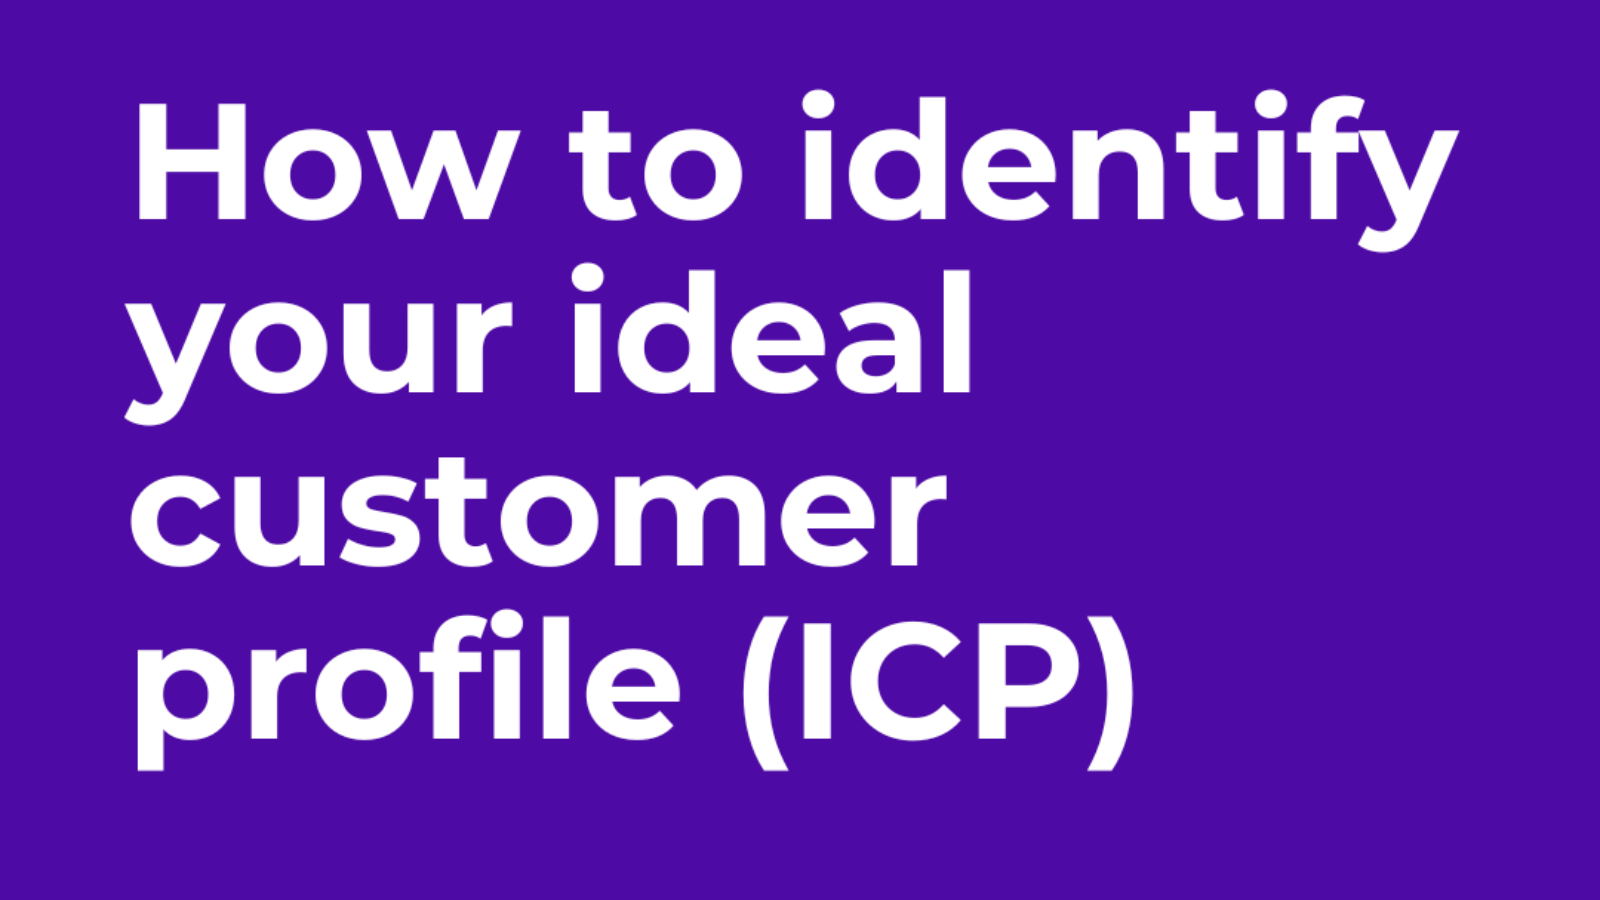 How to Identify Your Ideal Customer Profile (ICP) for Maximum Engagement and Conversion